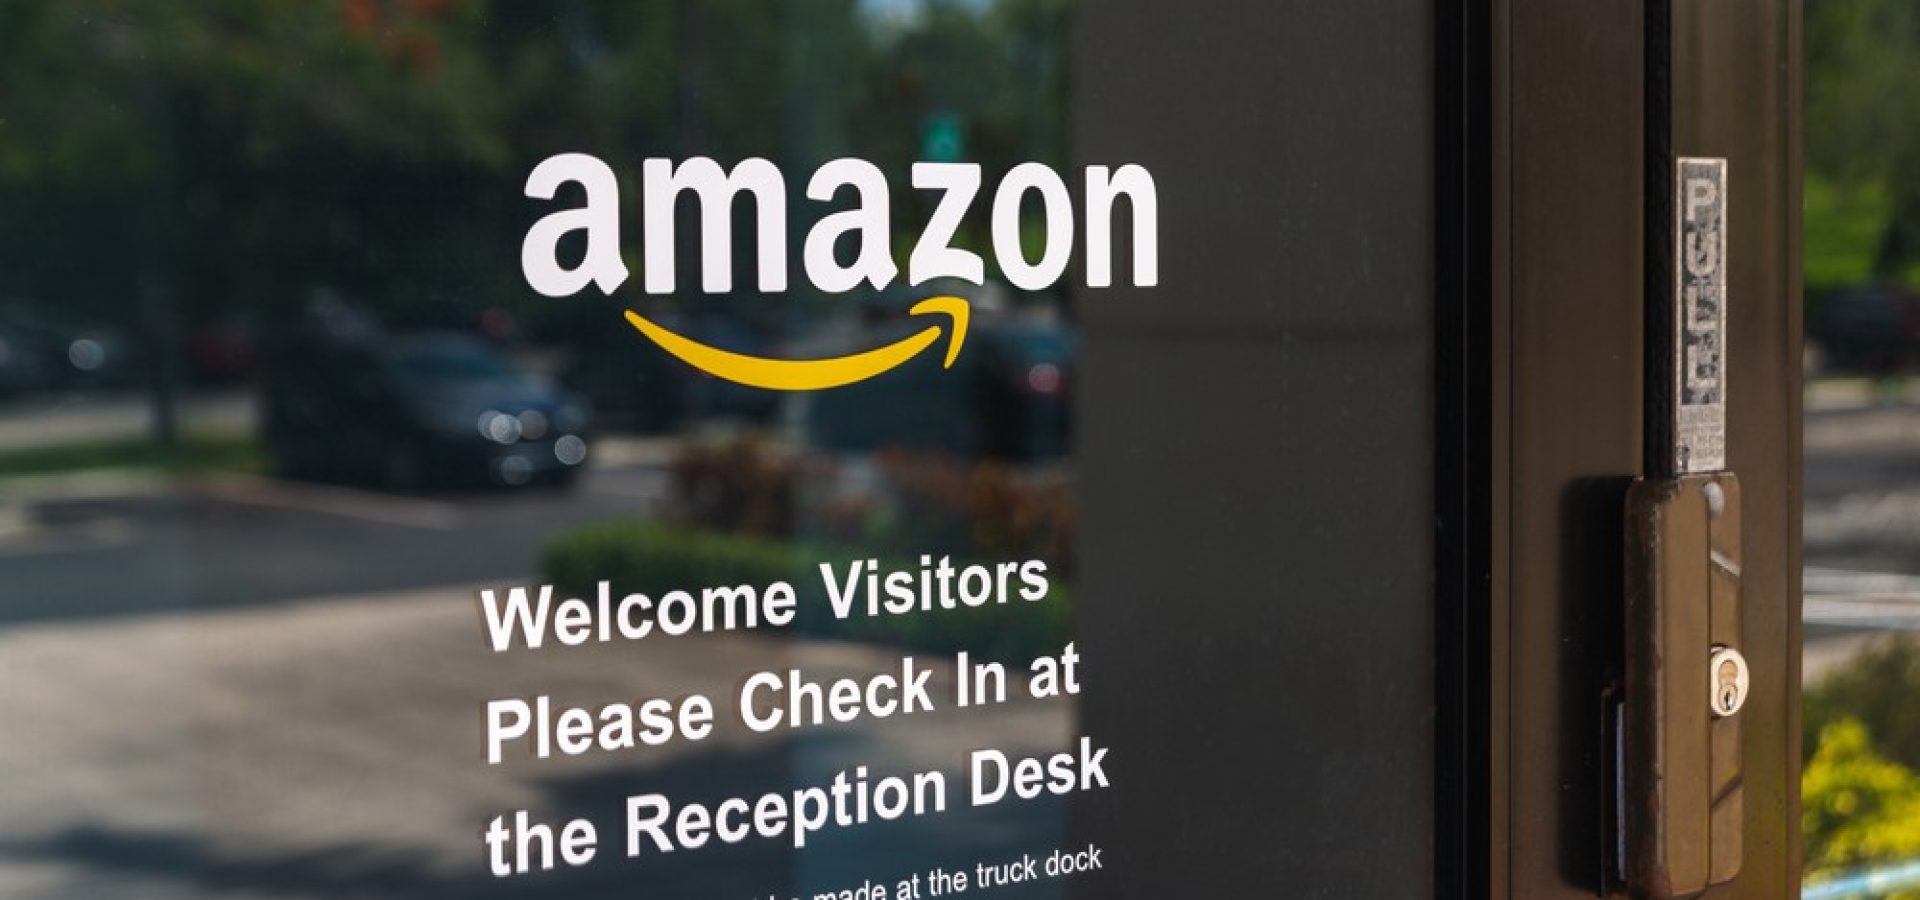 Amazon is looking for a digital currency payment lead